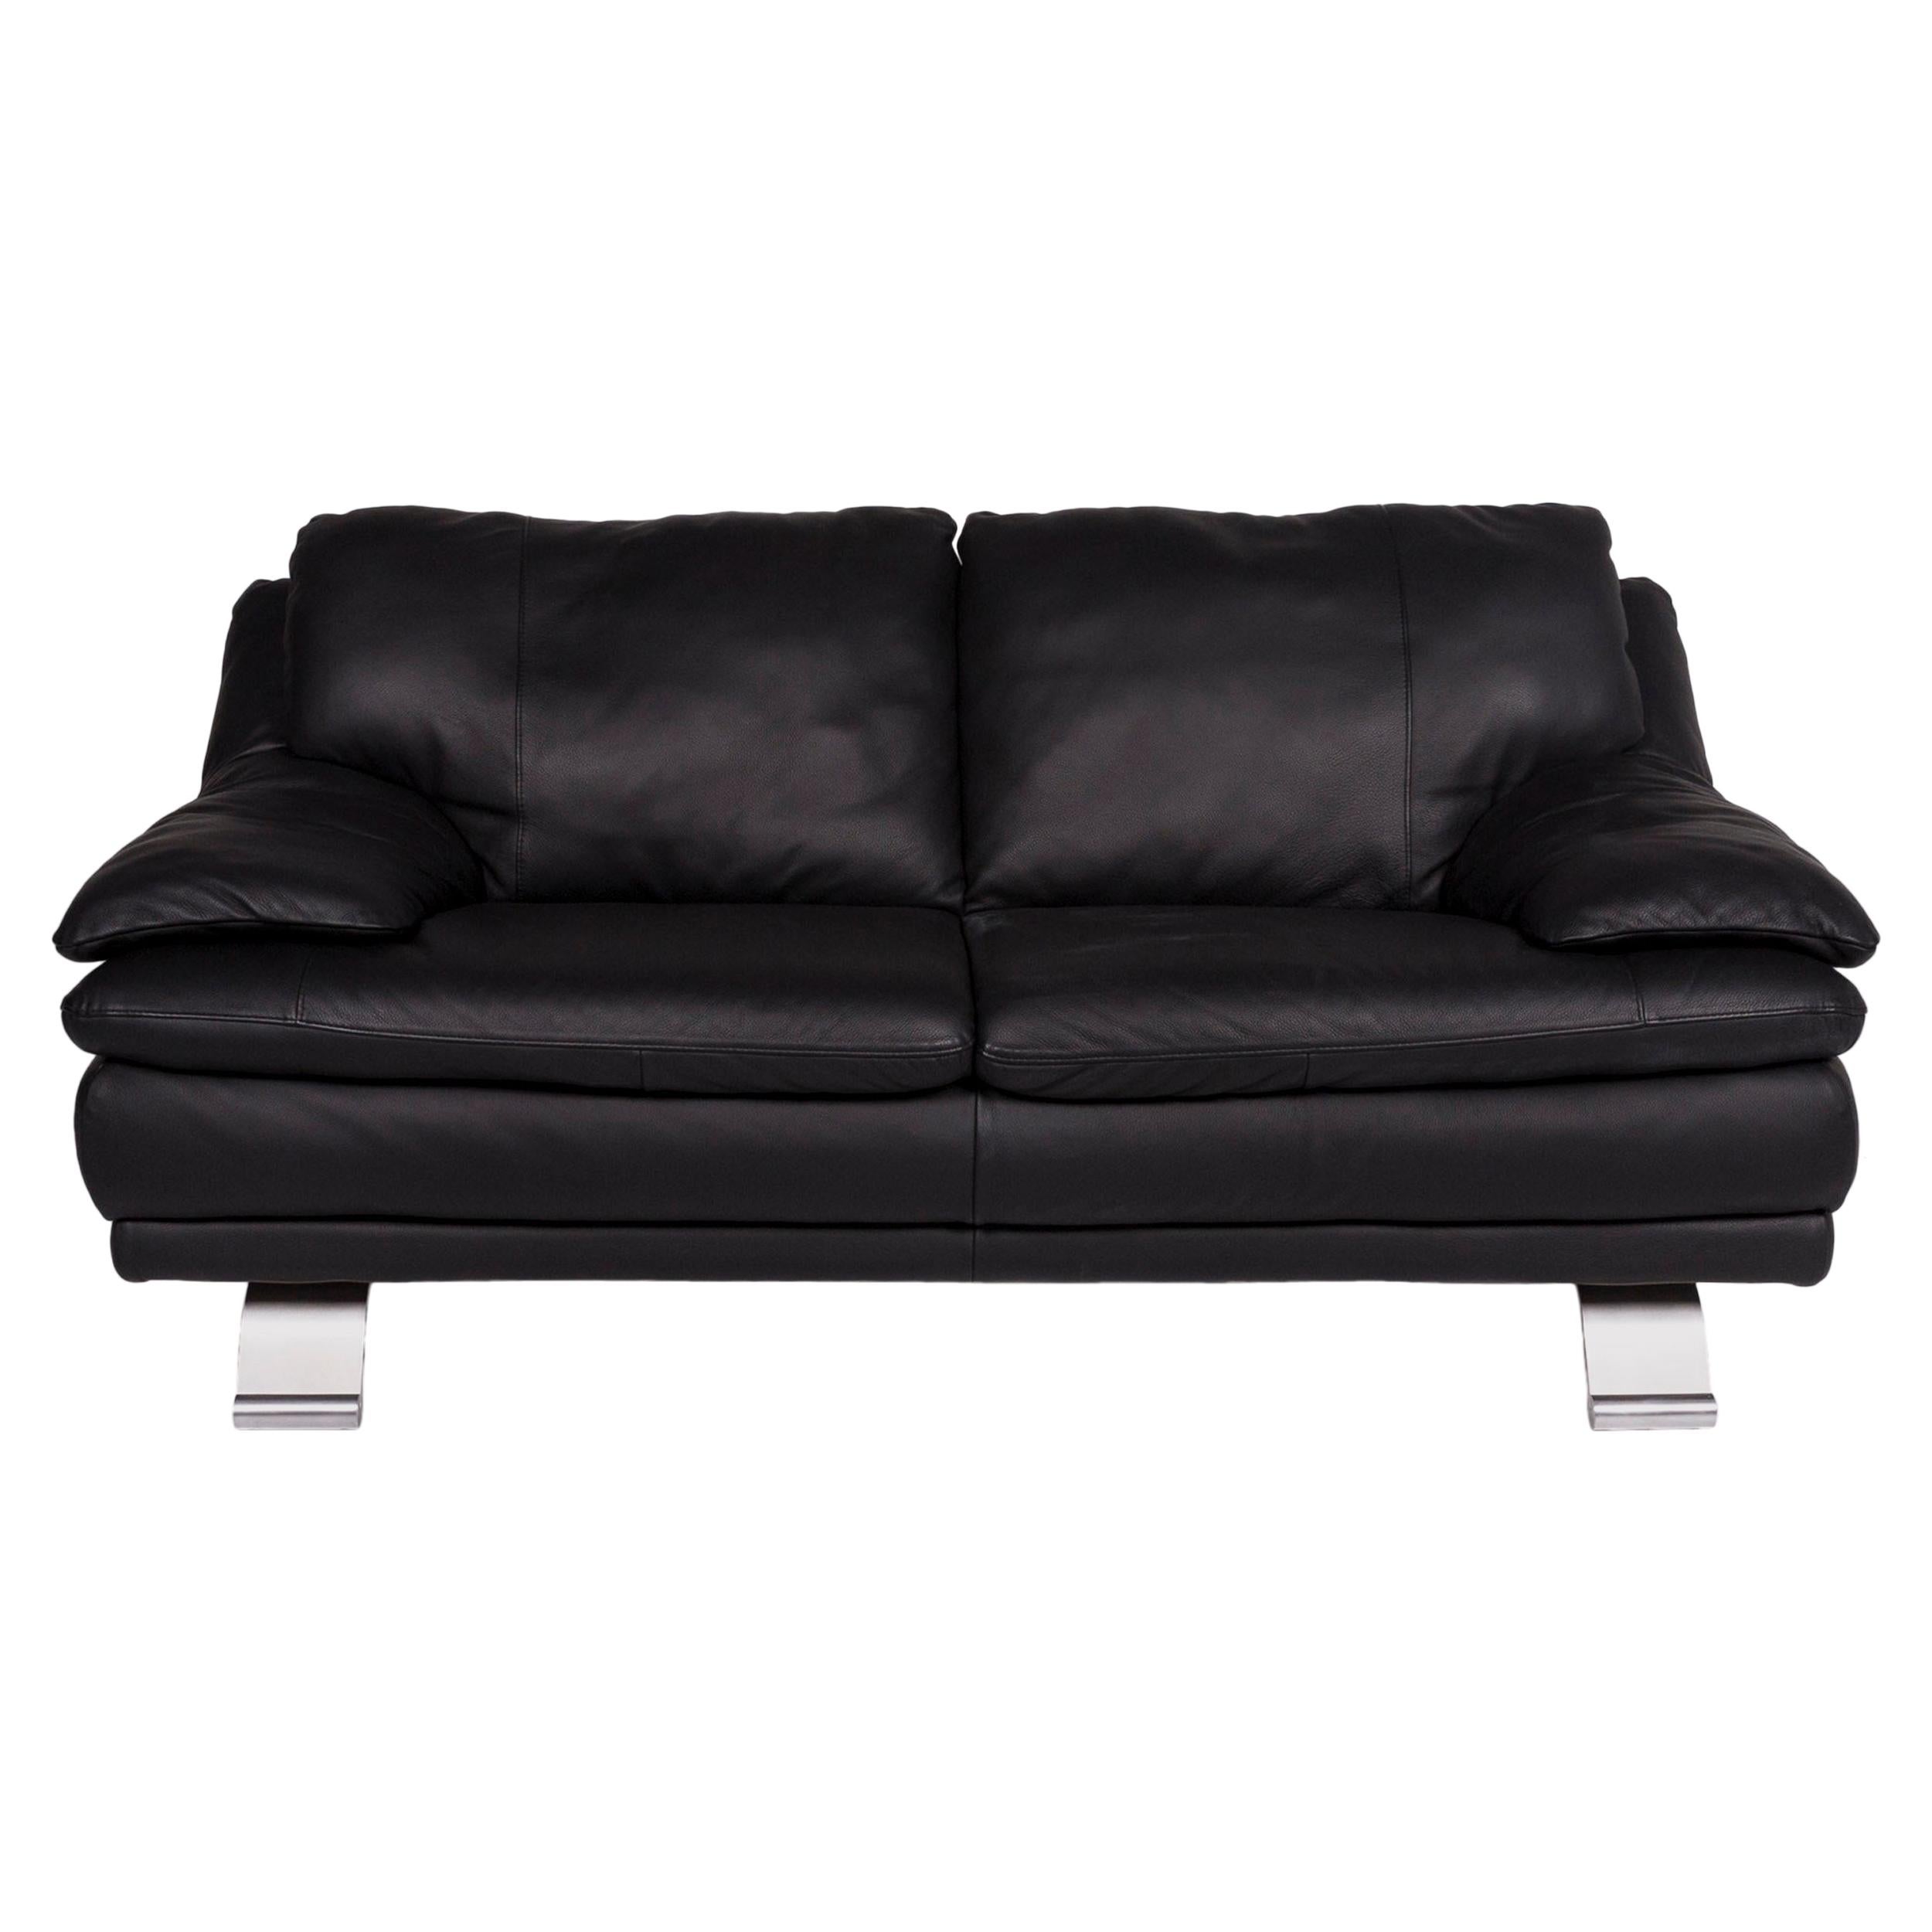 Italsofa Leather Sofa Black Two-Seat Couch